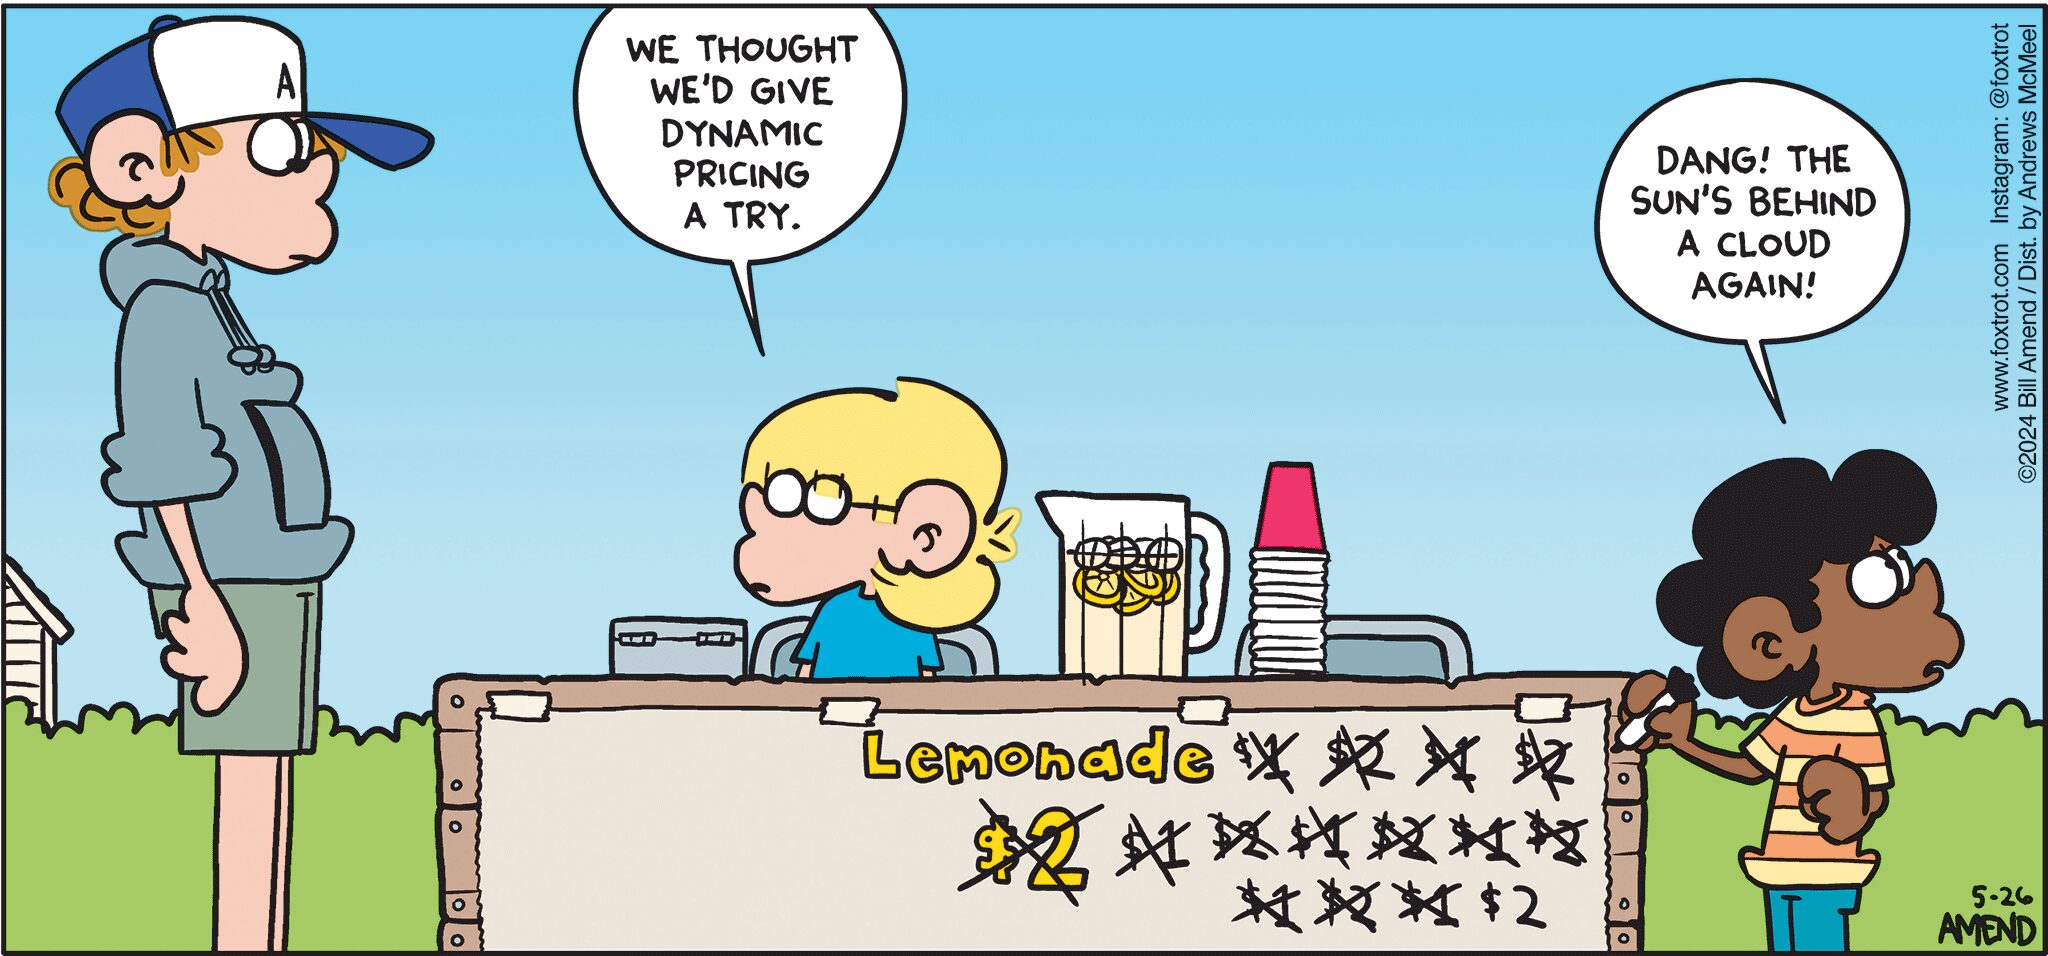 FoxTrot comic strip by Bill Amend - "Dynamic Pricing" published May 26, 2024 - Transcript: Jason Fox: We thought we'd give dynamic pricing a try. Marcus: Dang! The sun's behind a cloud again!